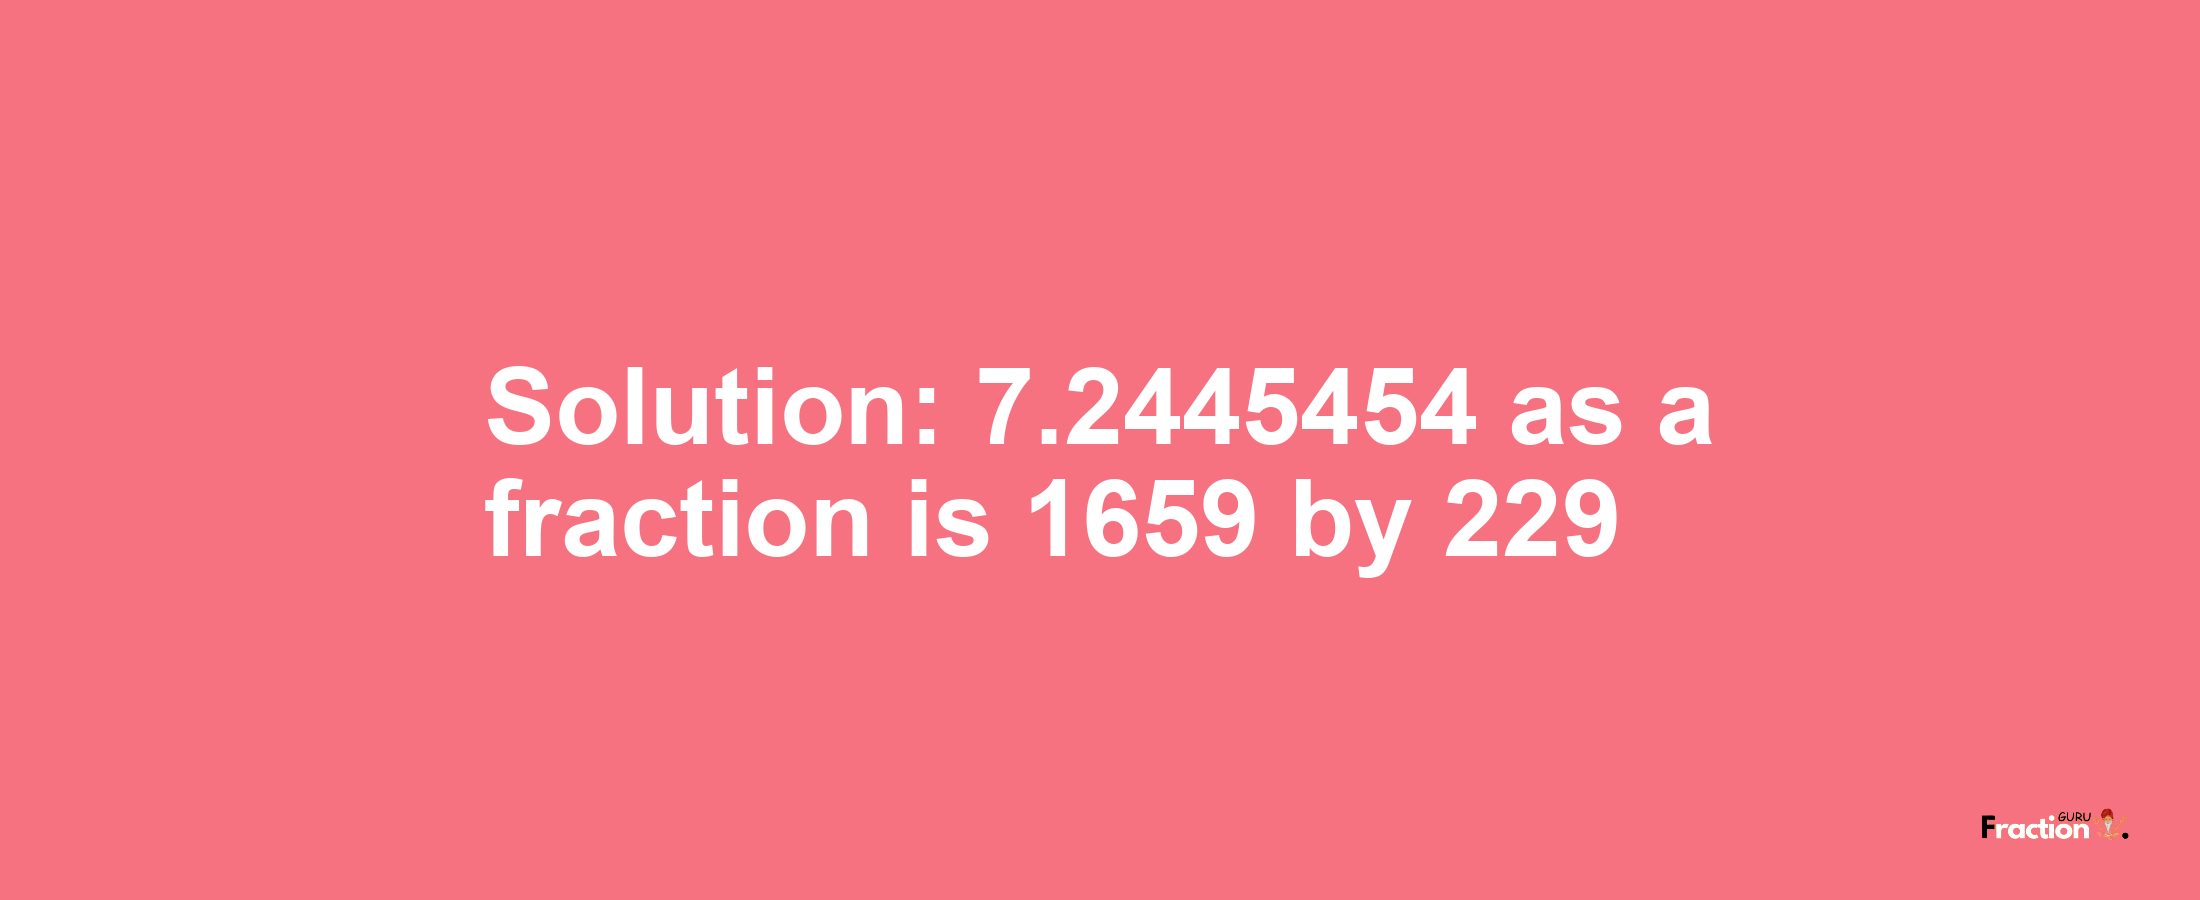 Solution:7.2445454 as a fraction is 1659/229